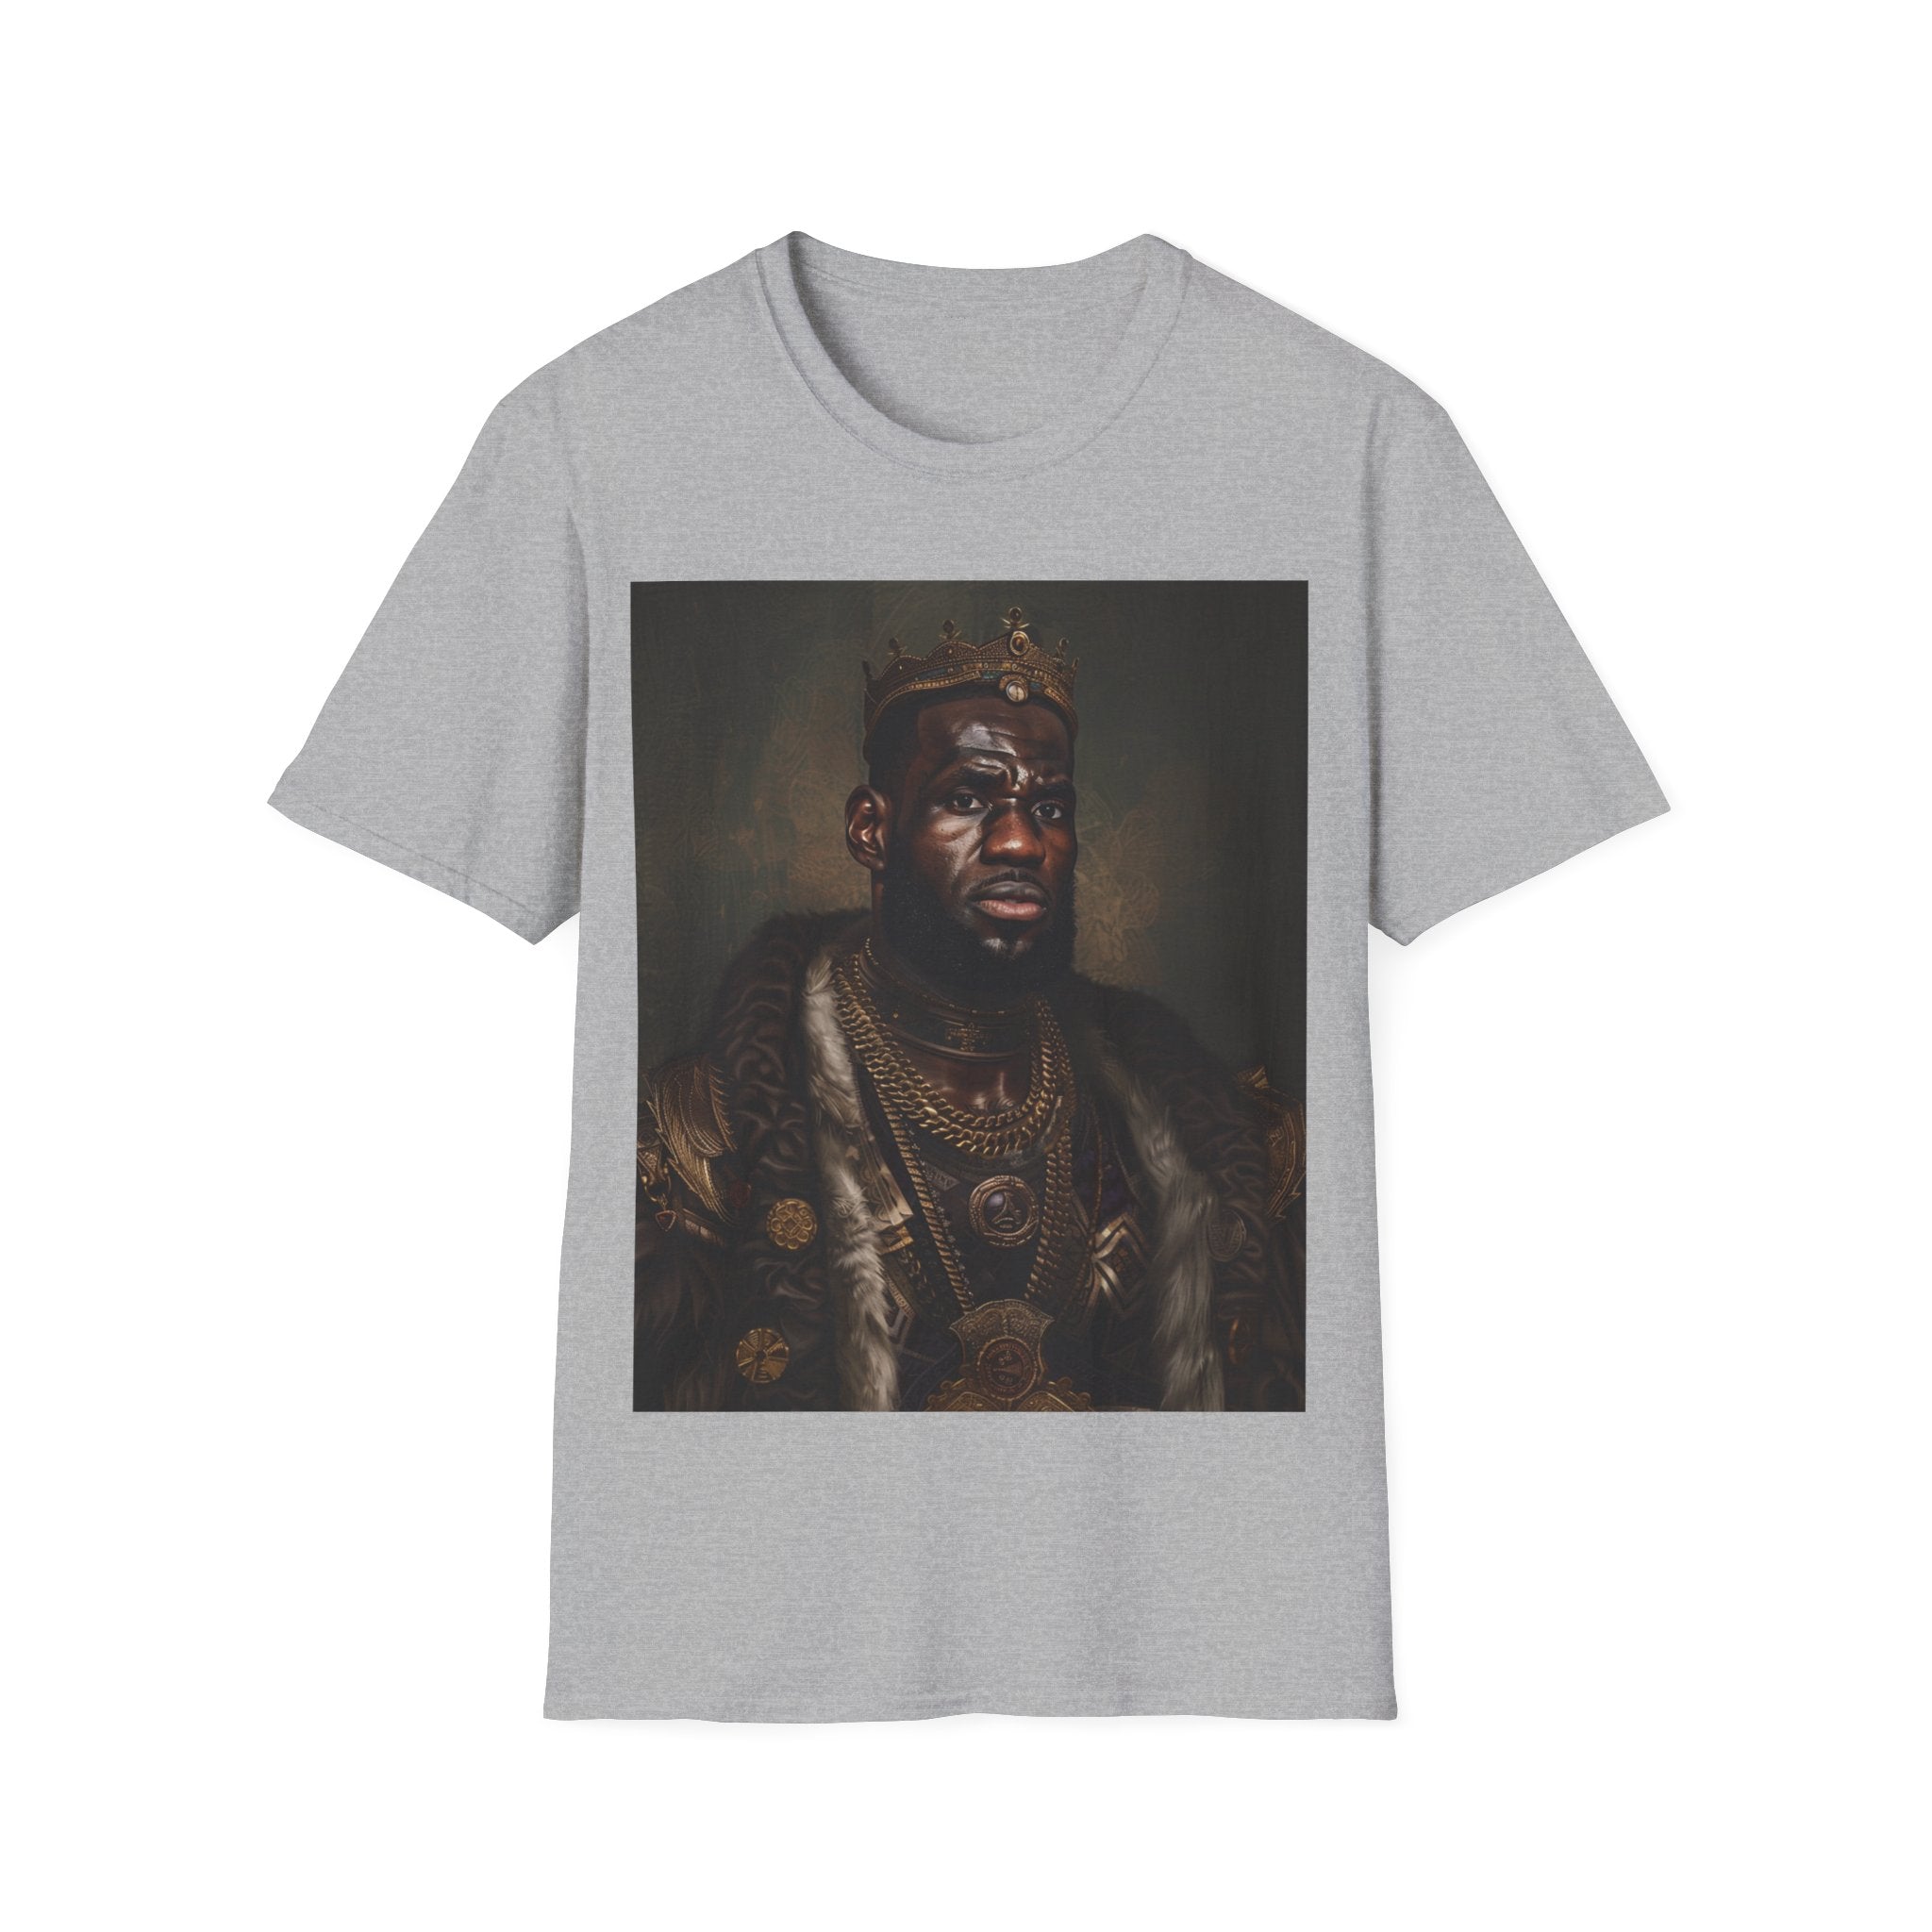 The image showcases the sophisticated unisex softstyle t-shirt, featuring a detailed and artistically rendered portrait of King James in the style of a Renaissance painting. The quality of the softstyle material is evident, promising comfort and durability, while the design speaks to the blend of sports legacy and classical elegance. Inspired by Lebron James.